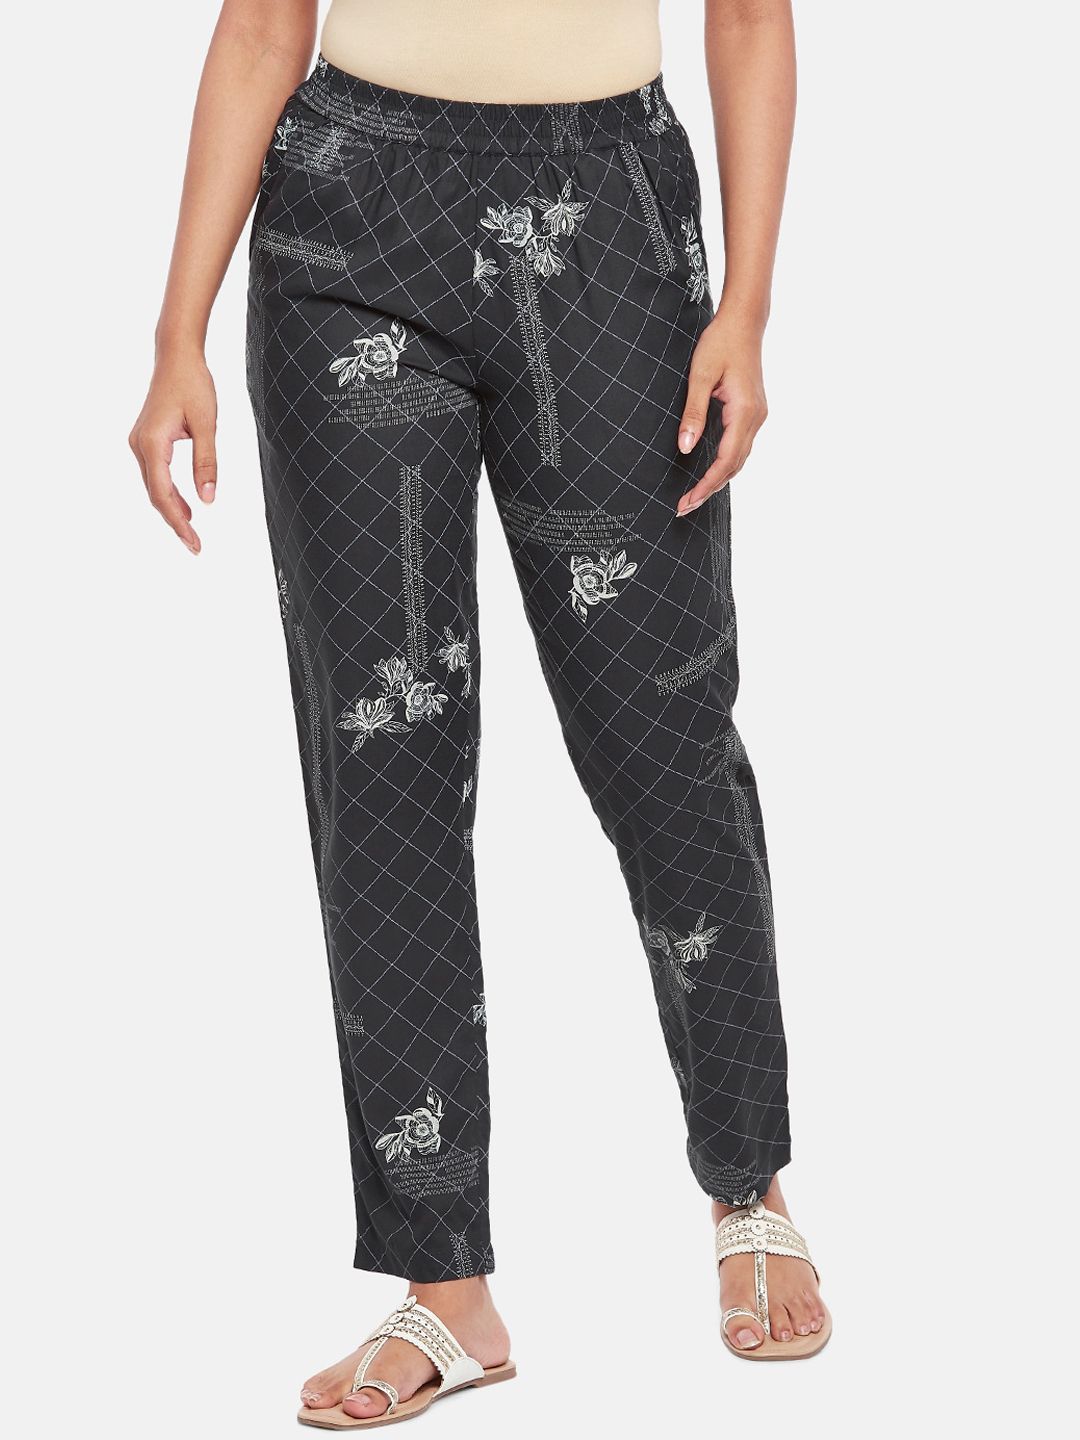 AKKRITI BY PANTALOONS Women Black & White Floral Printed Trousers Price in India